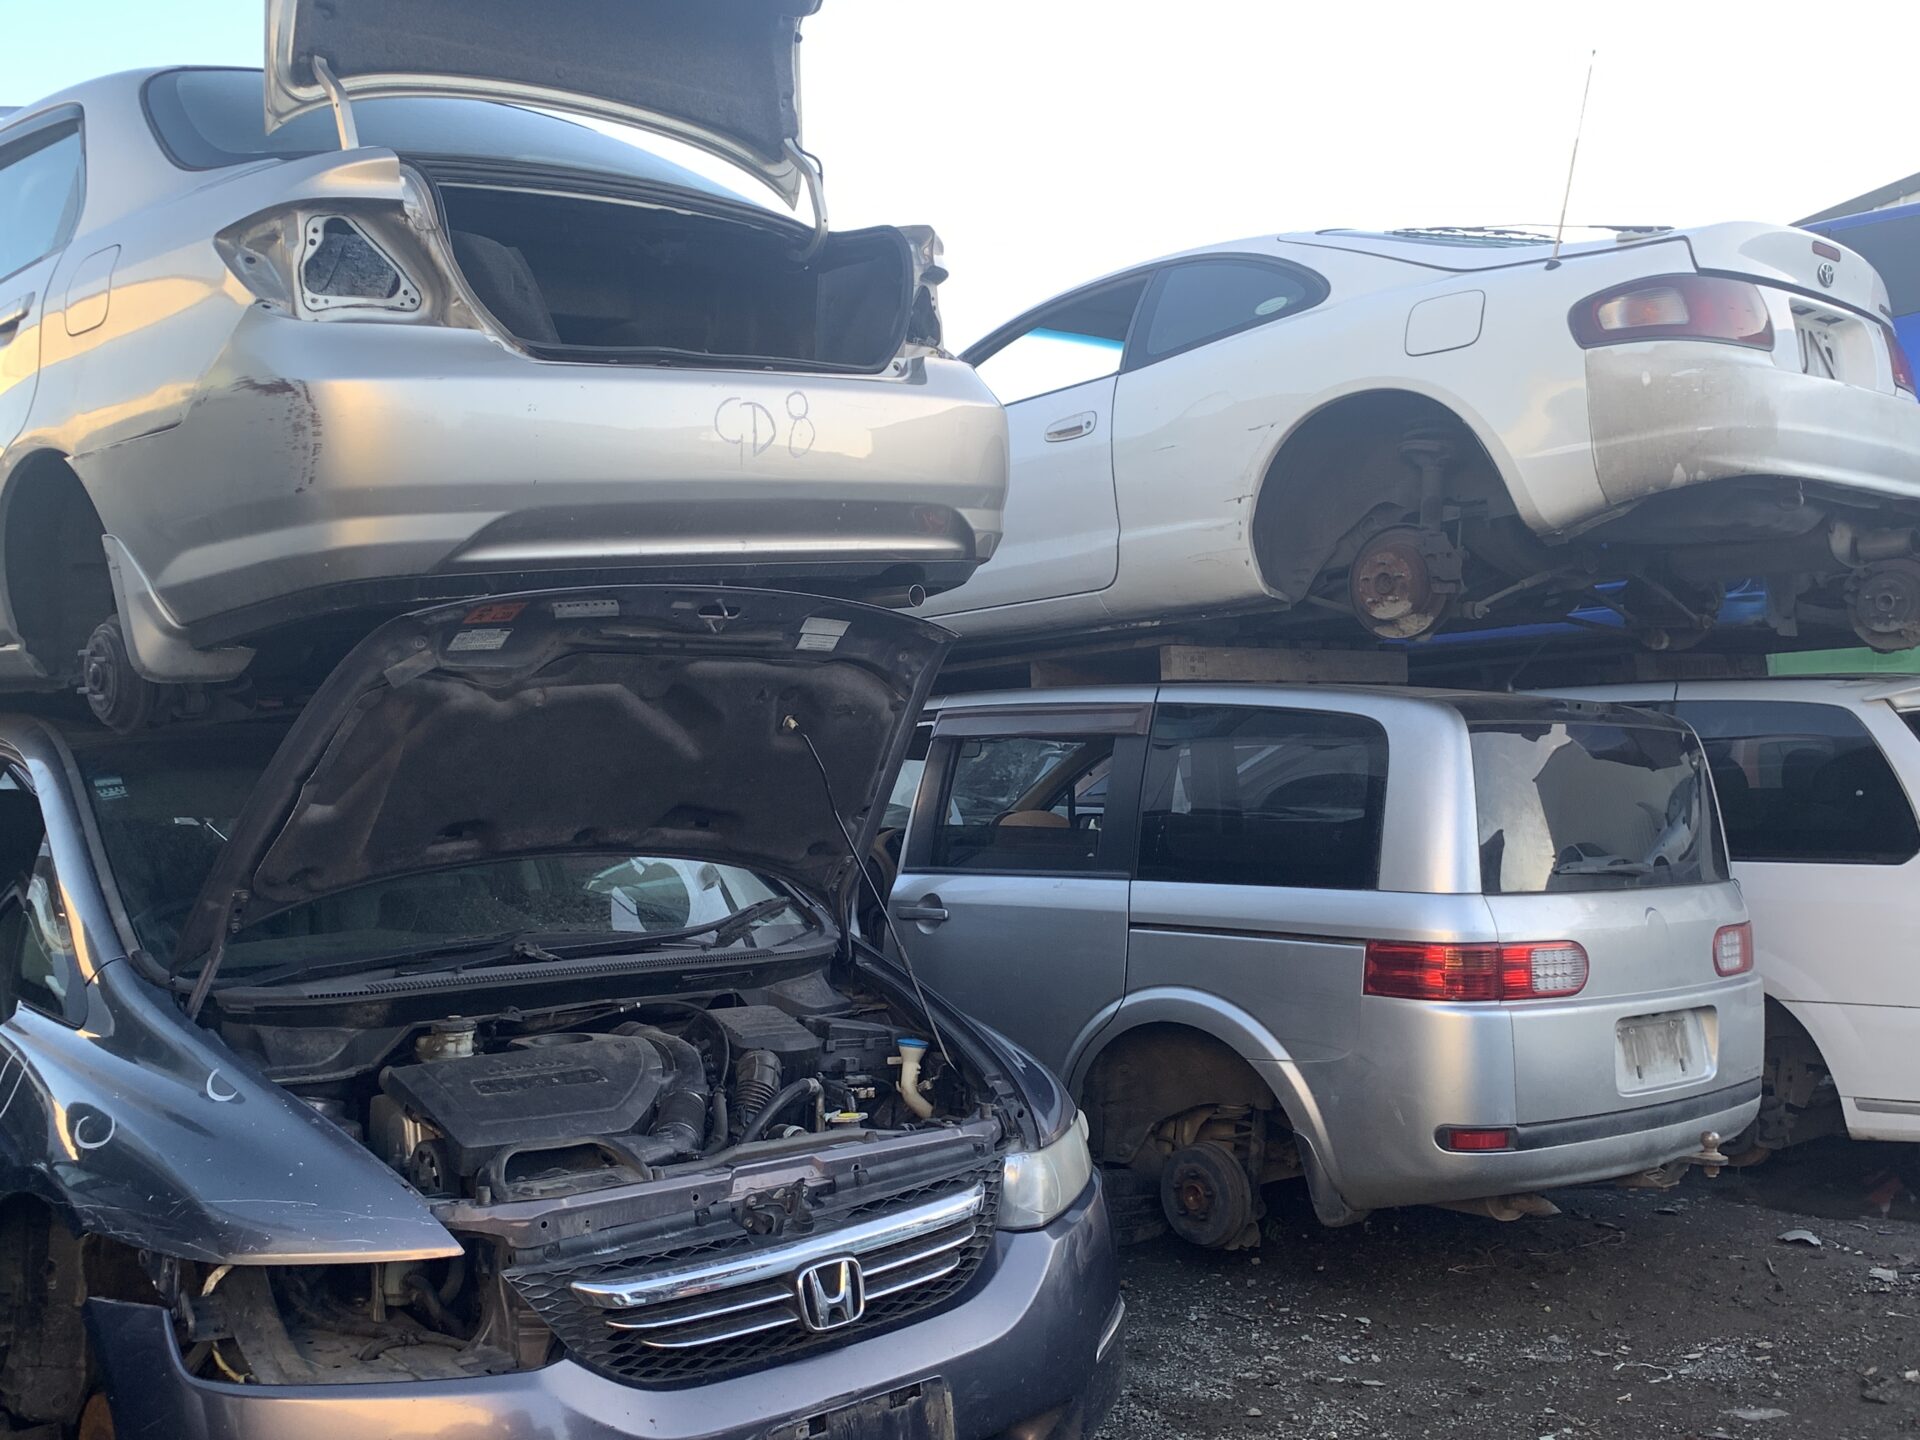 Car Wreckers Whangarei: Vehicle Buyers & Used Auto Parts